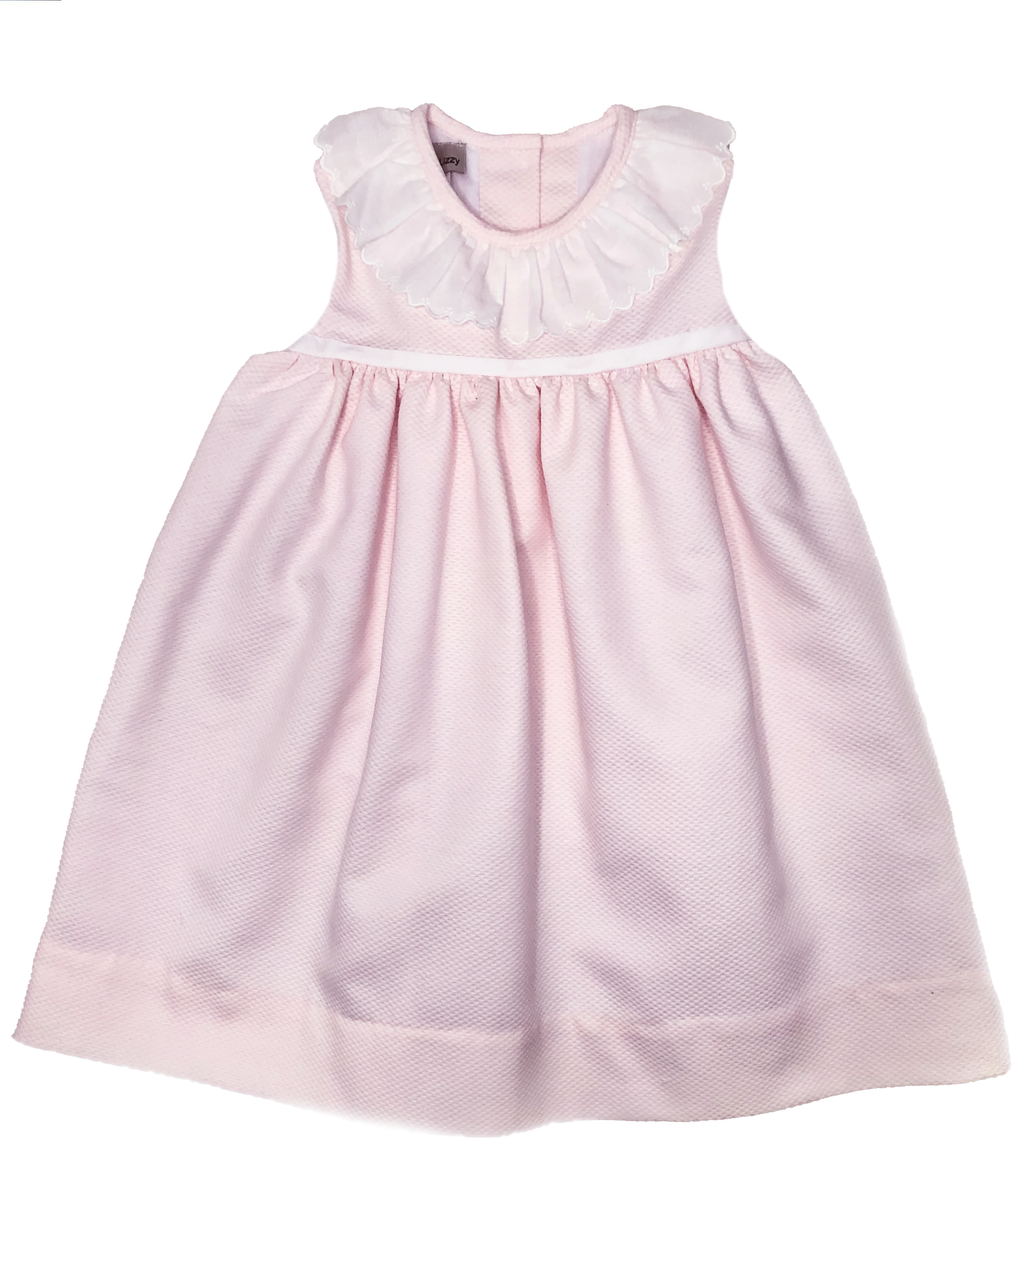 Pink Lacey Girl's Pique  Dress - Little Threads Inc. Children's Clothing